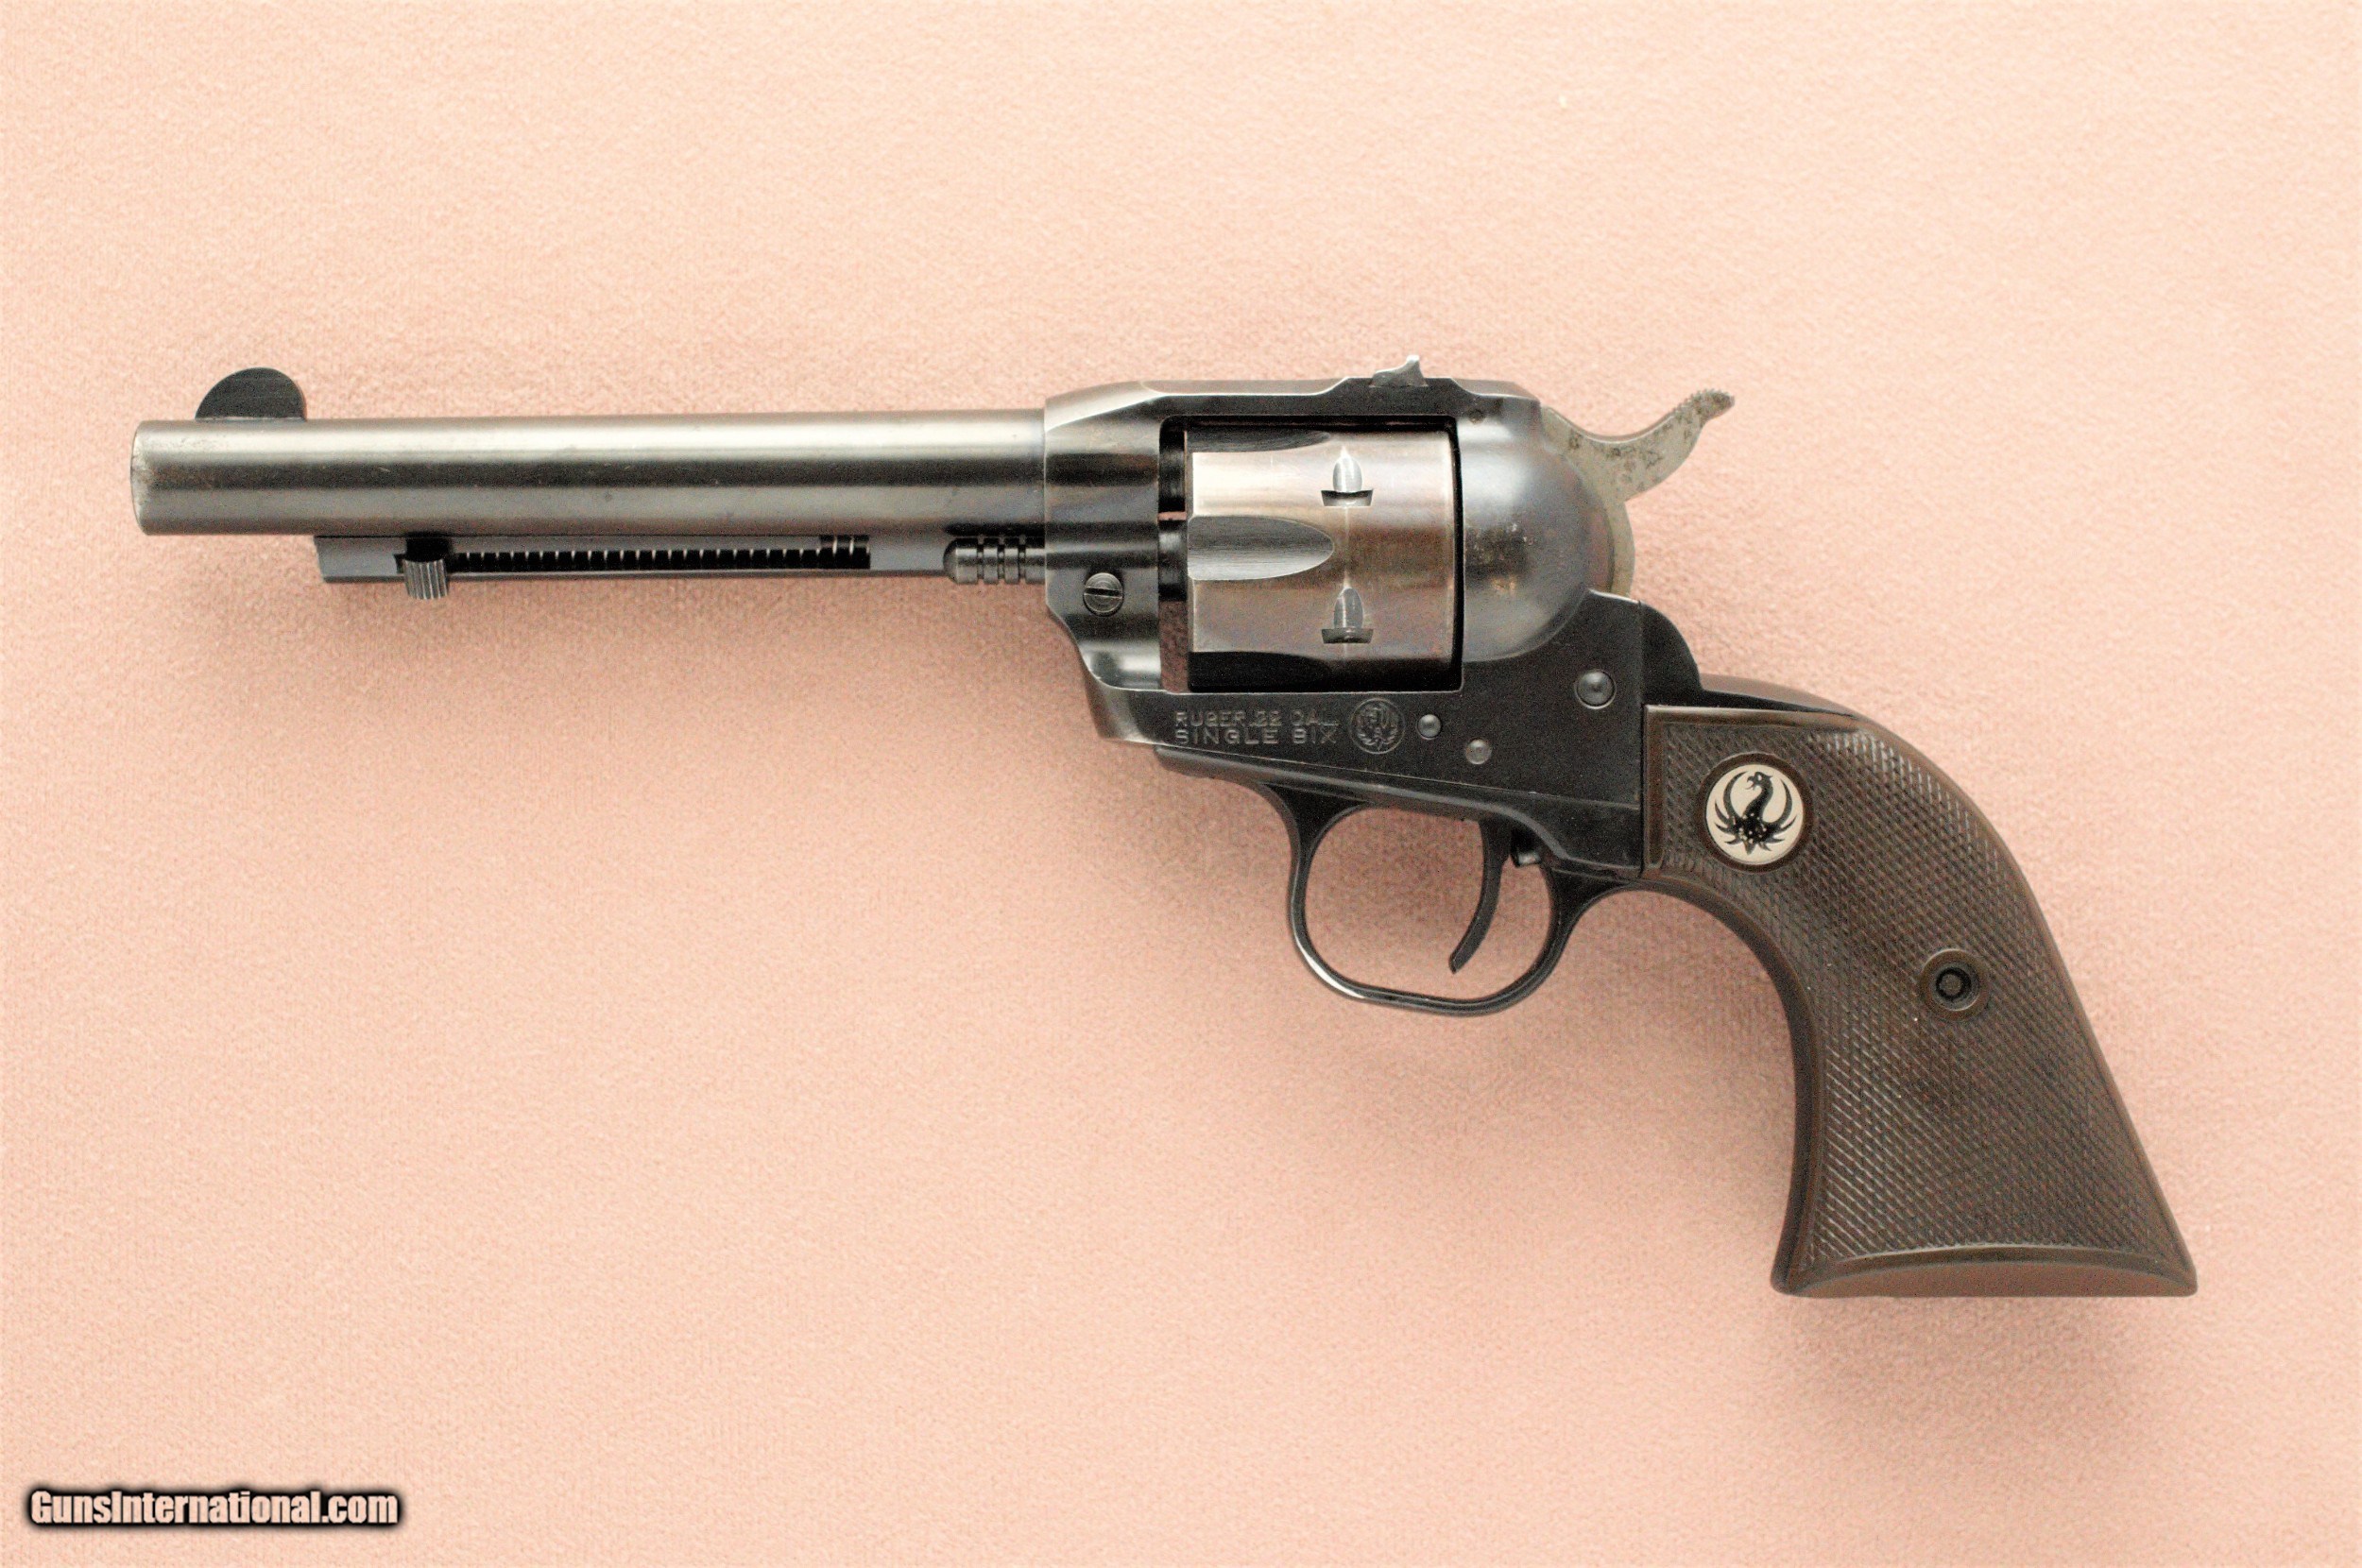 ruger old model single six serial numbers